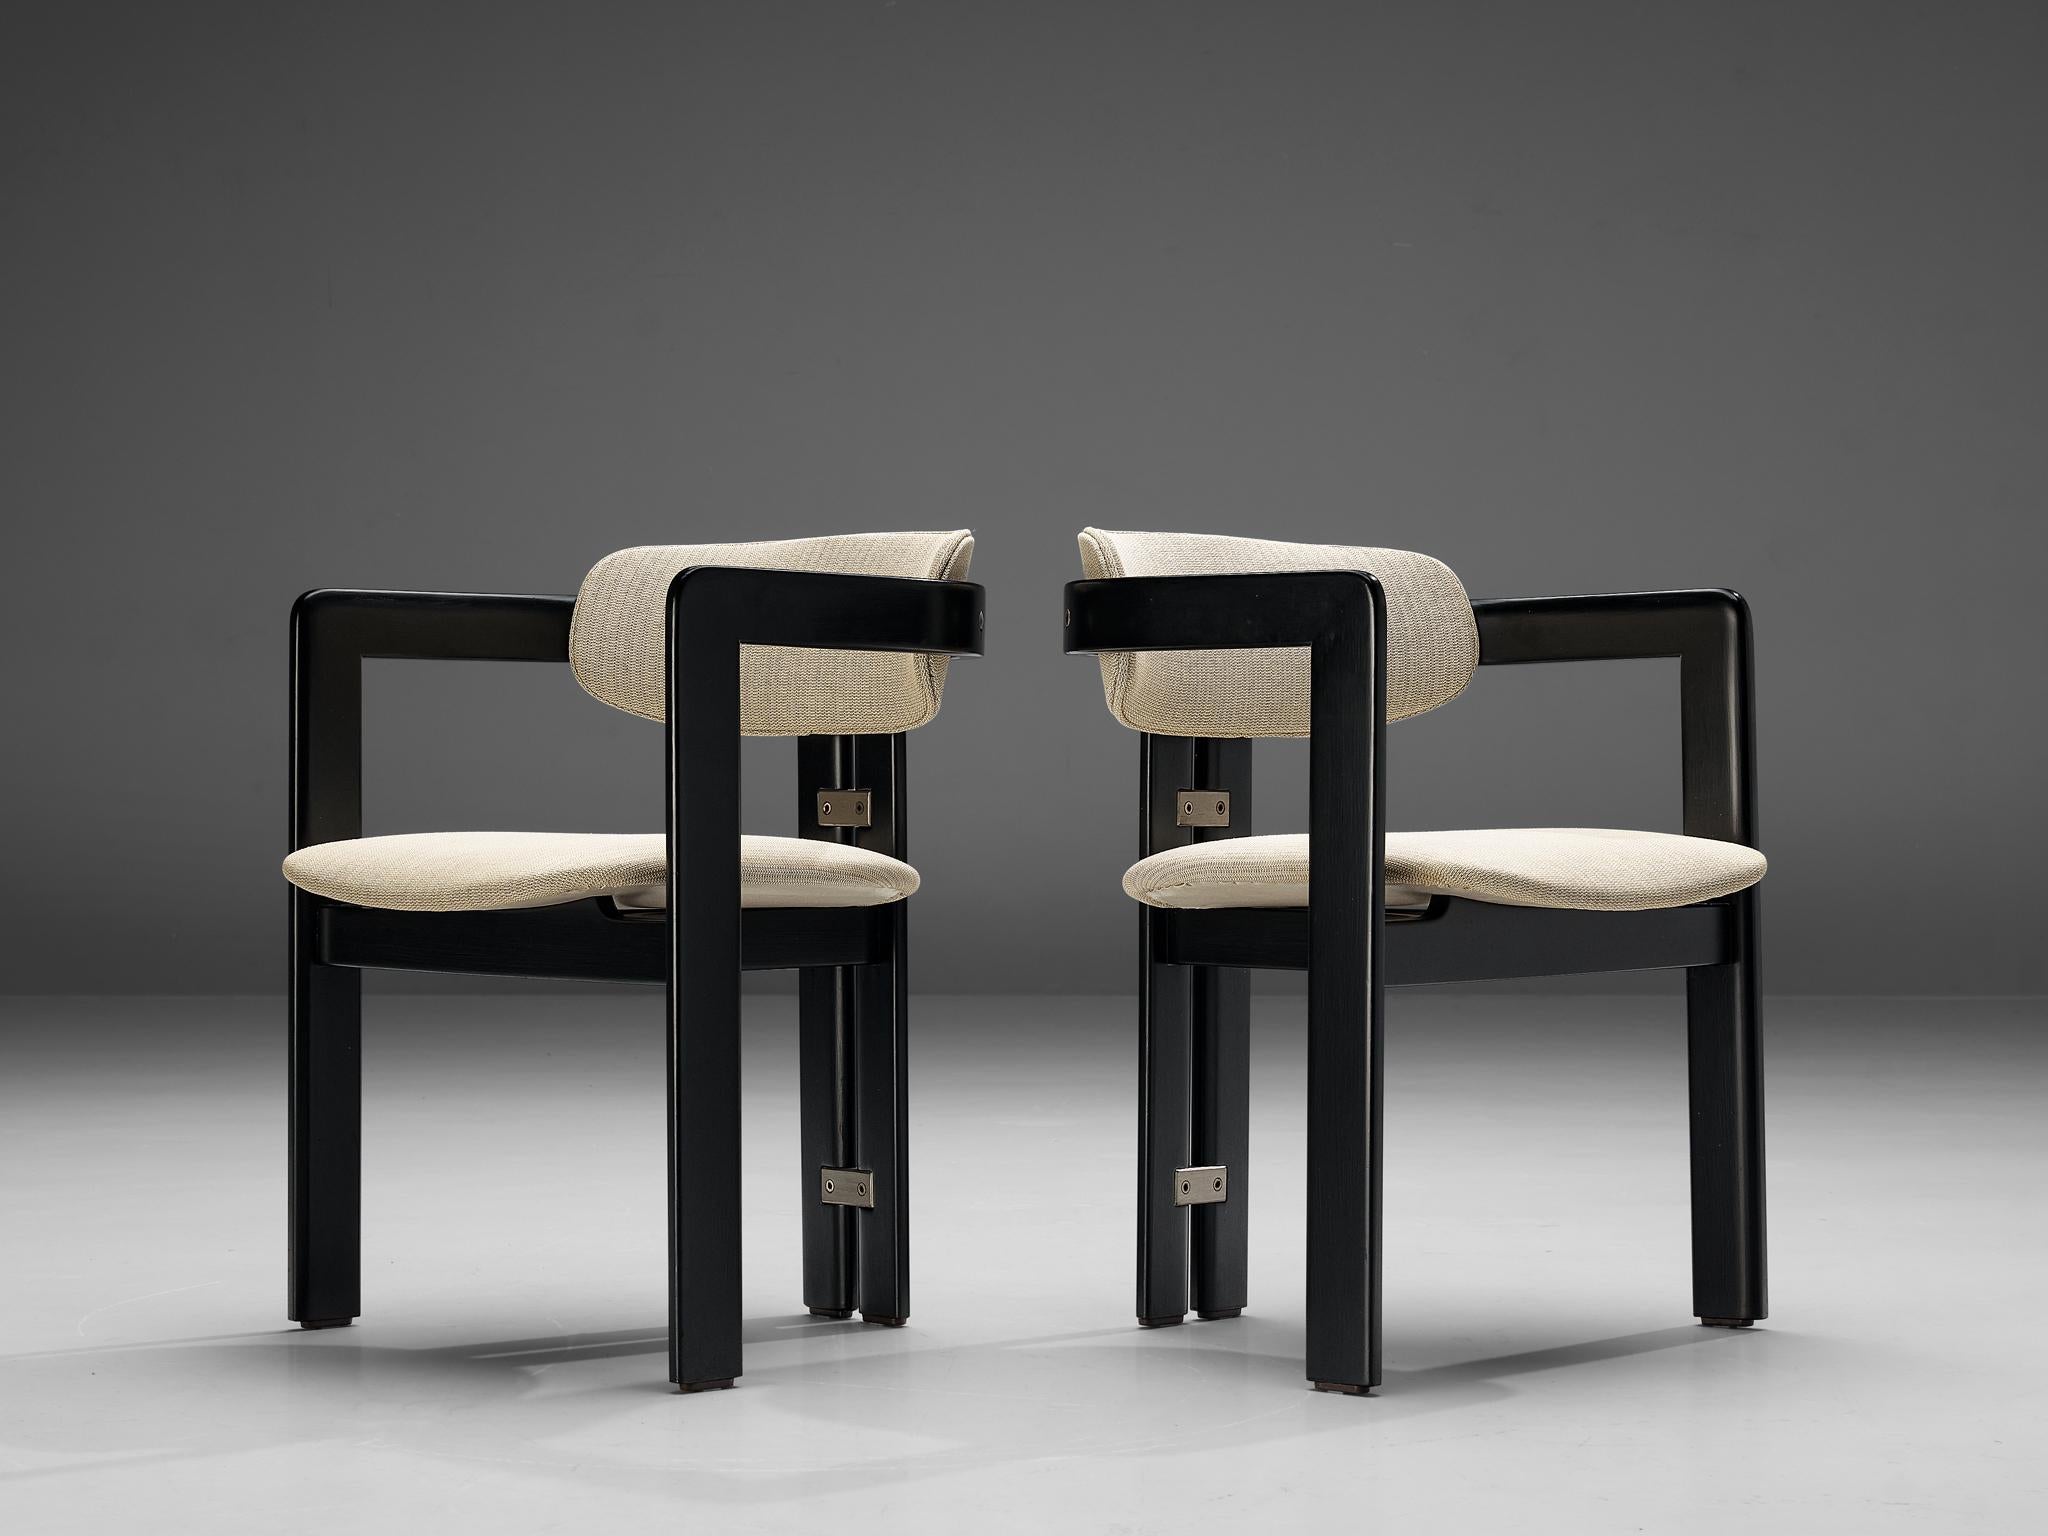 Augusto Savini for Pozzi, pair of 'Pamplona' dining chairs, lacquered wood, fabric, aluminum, Italy, 1965

Pamplona armchairs with black lacquered wooden framework and off-white seat and backrest. A characteristic design by Augusto Savini for Pozzi;